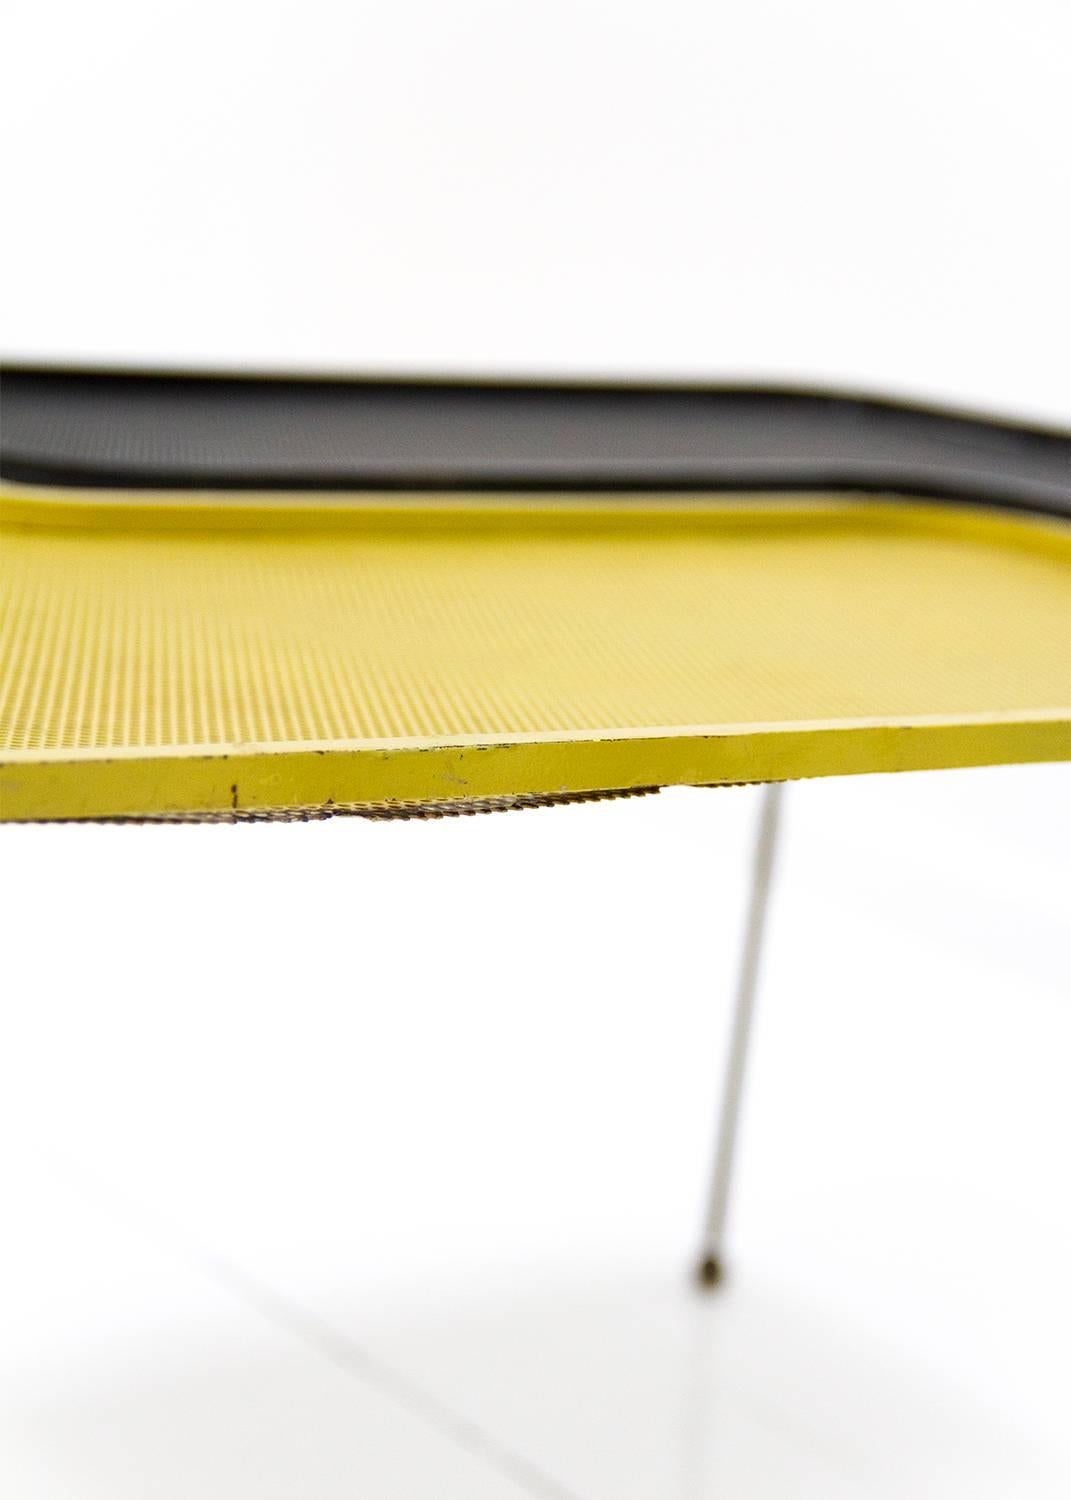 Mid-20th Century Domino Table Designed by Mathieu Matégot Black and Yellow Metal, circa 1950 For Sale